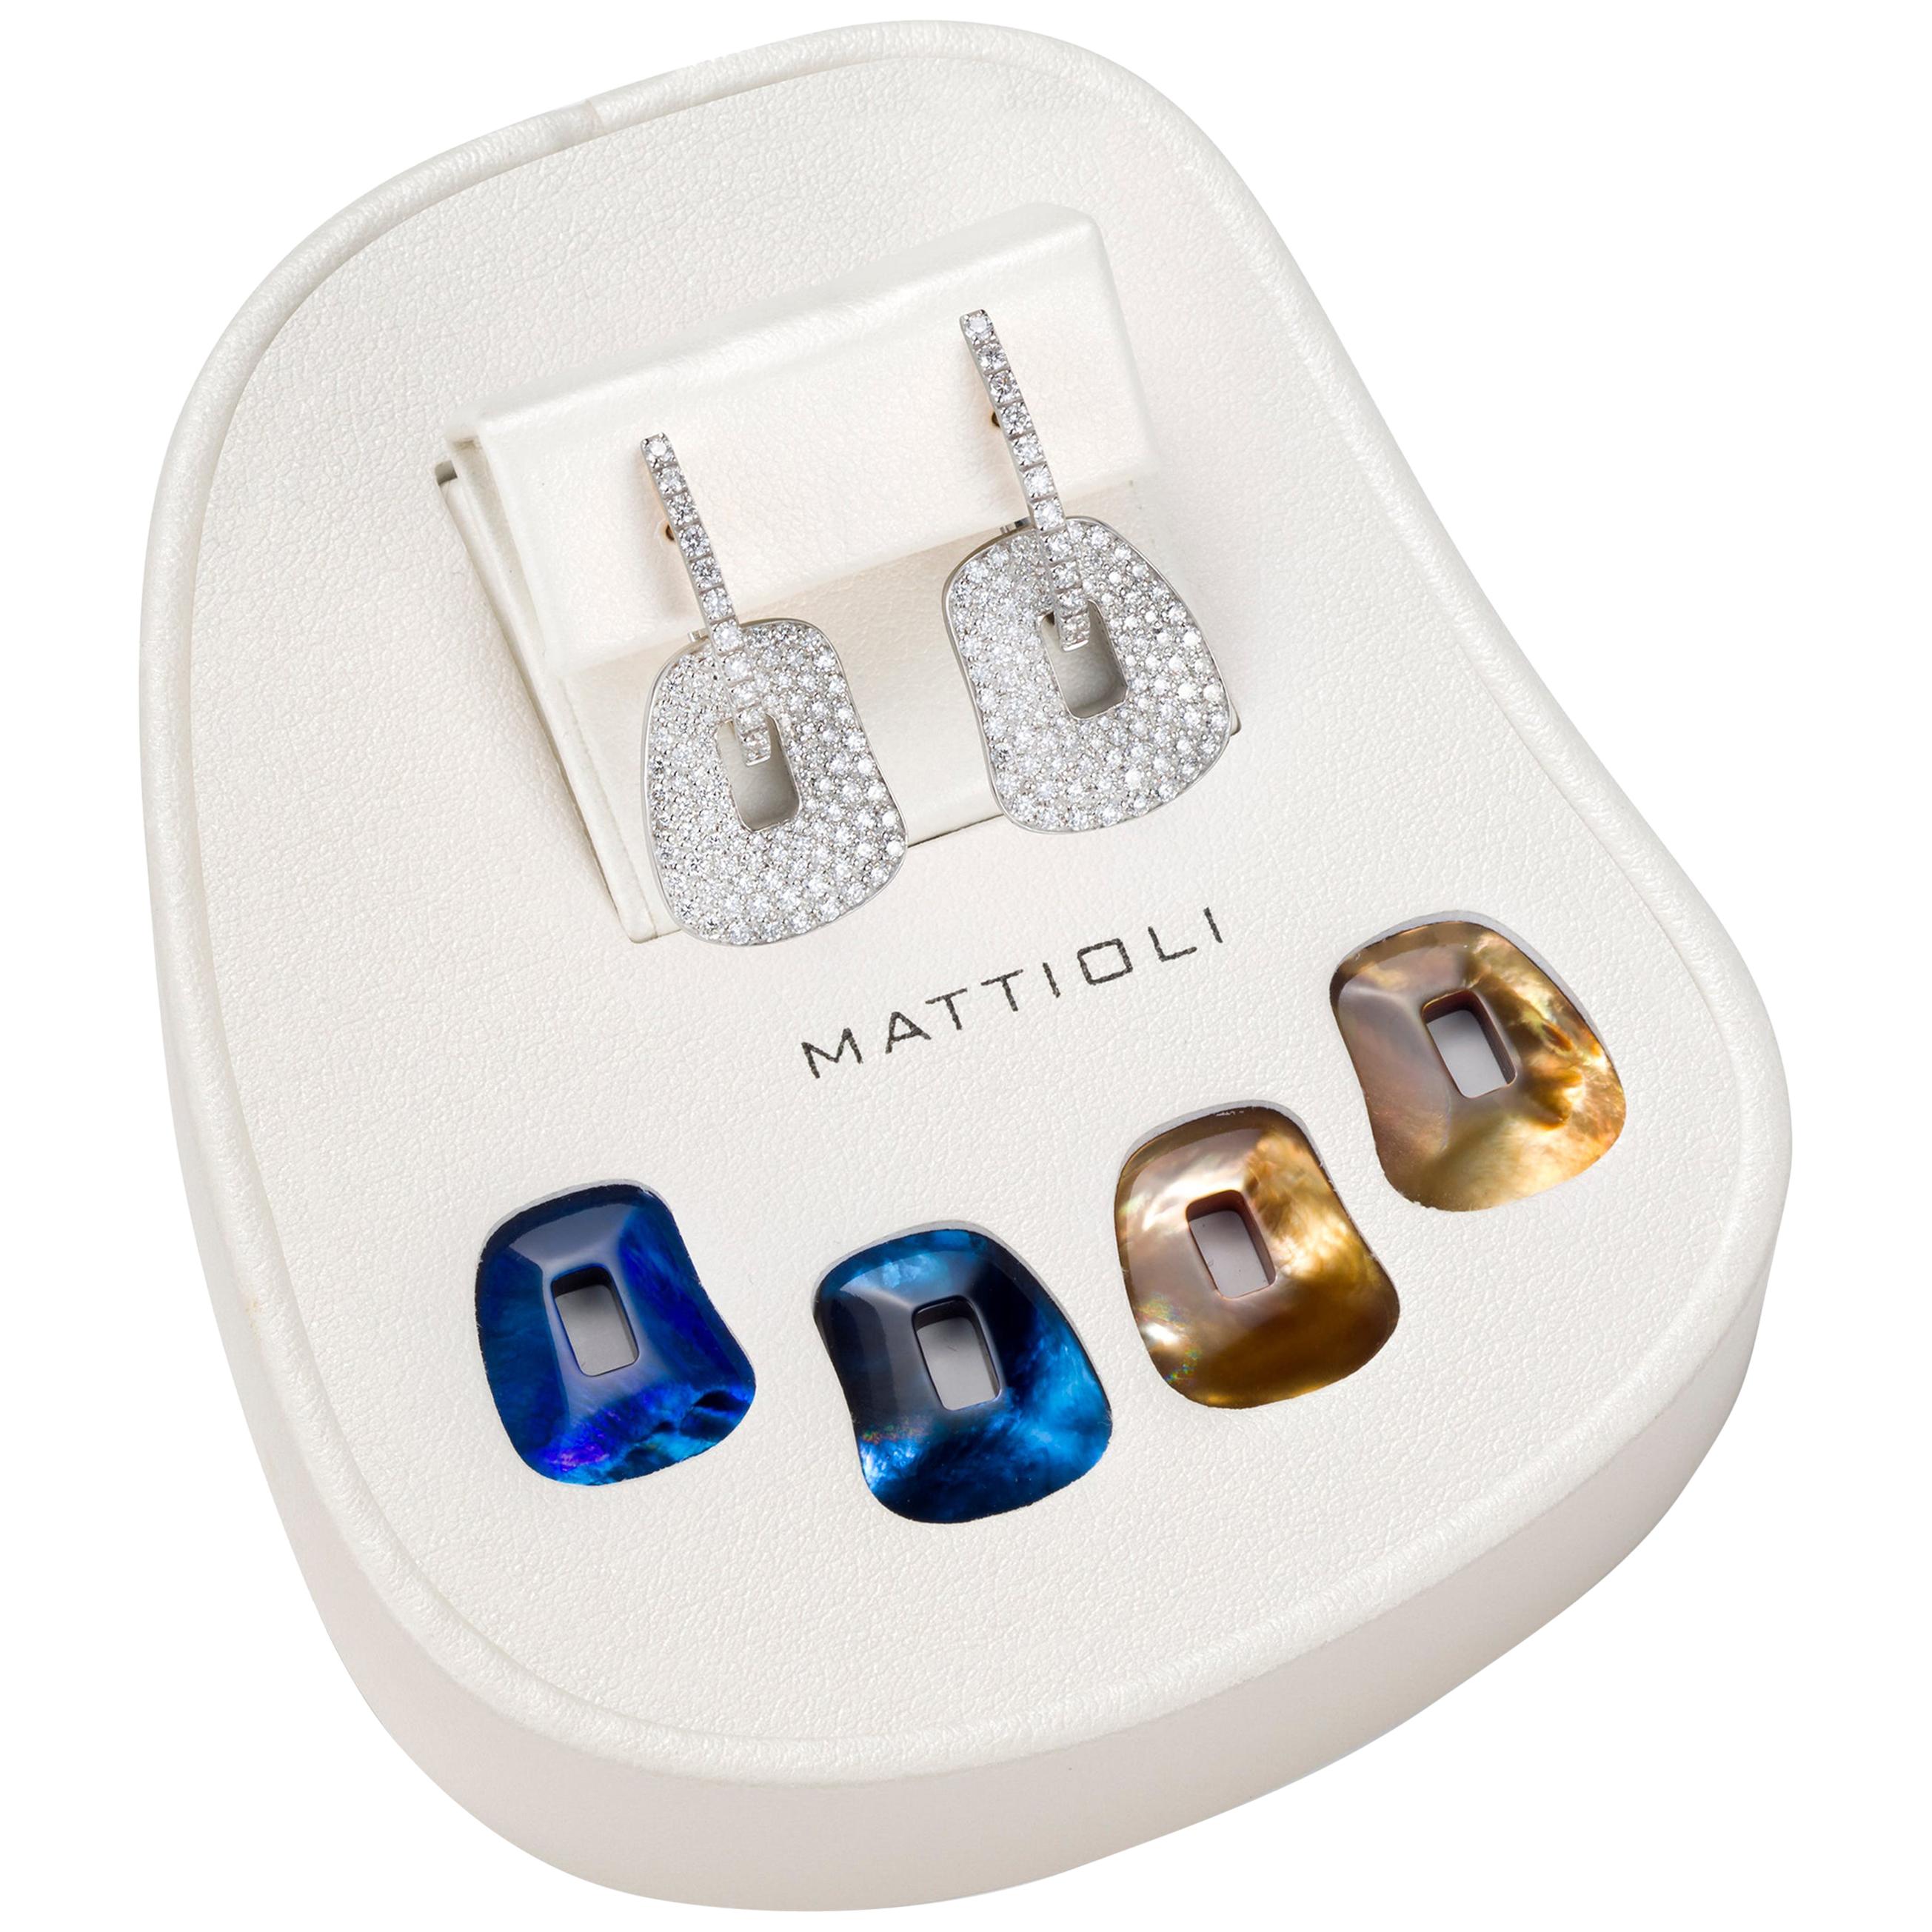 Mattioli Puzzle Pavé Earrings 18 Karat Yellow Gold and White Diamonds Small Size For Sale